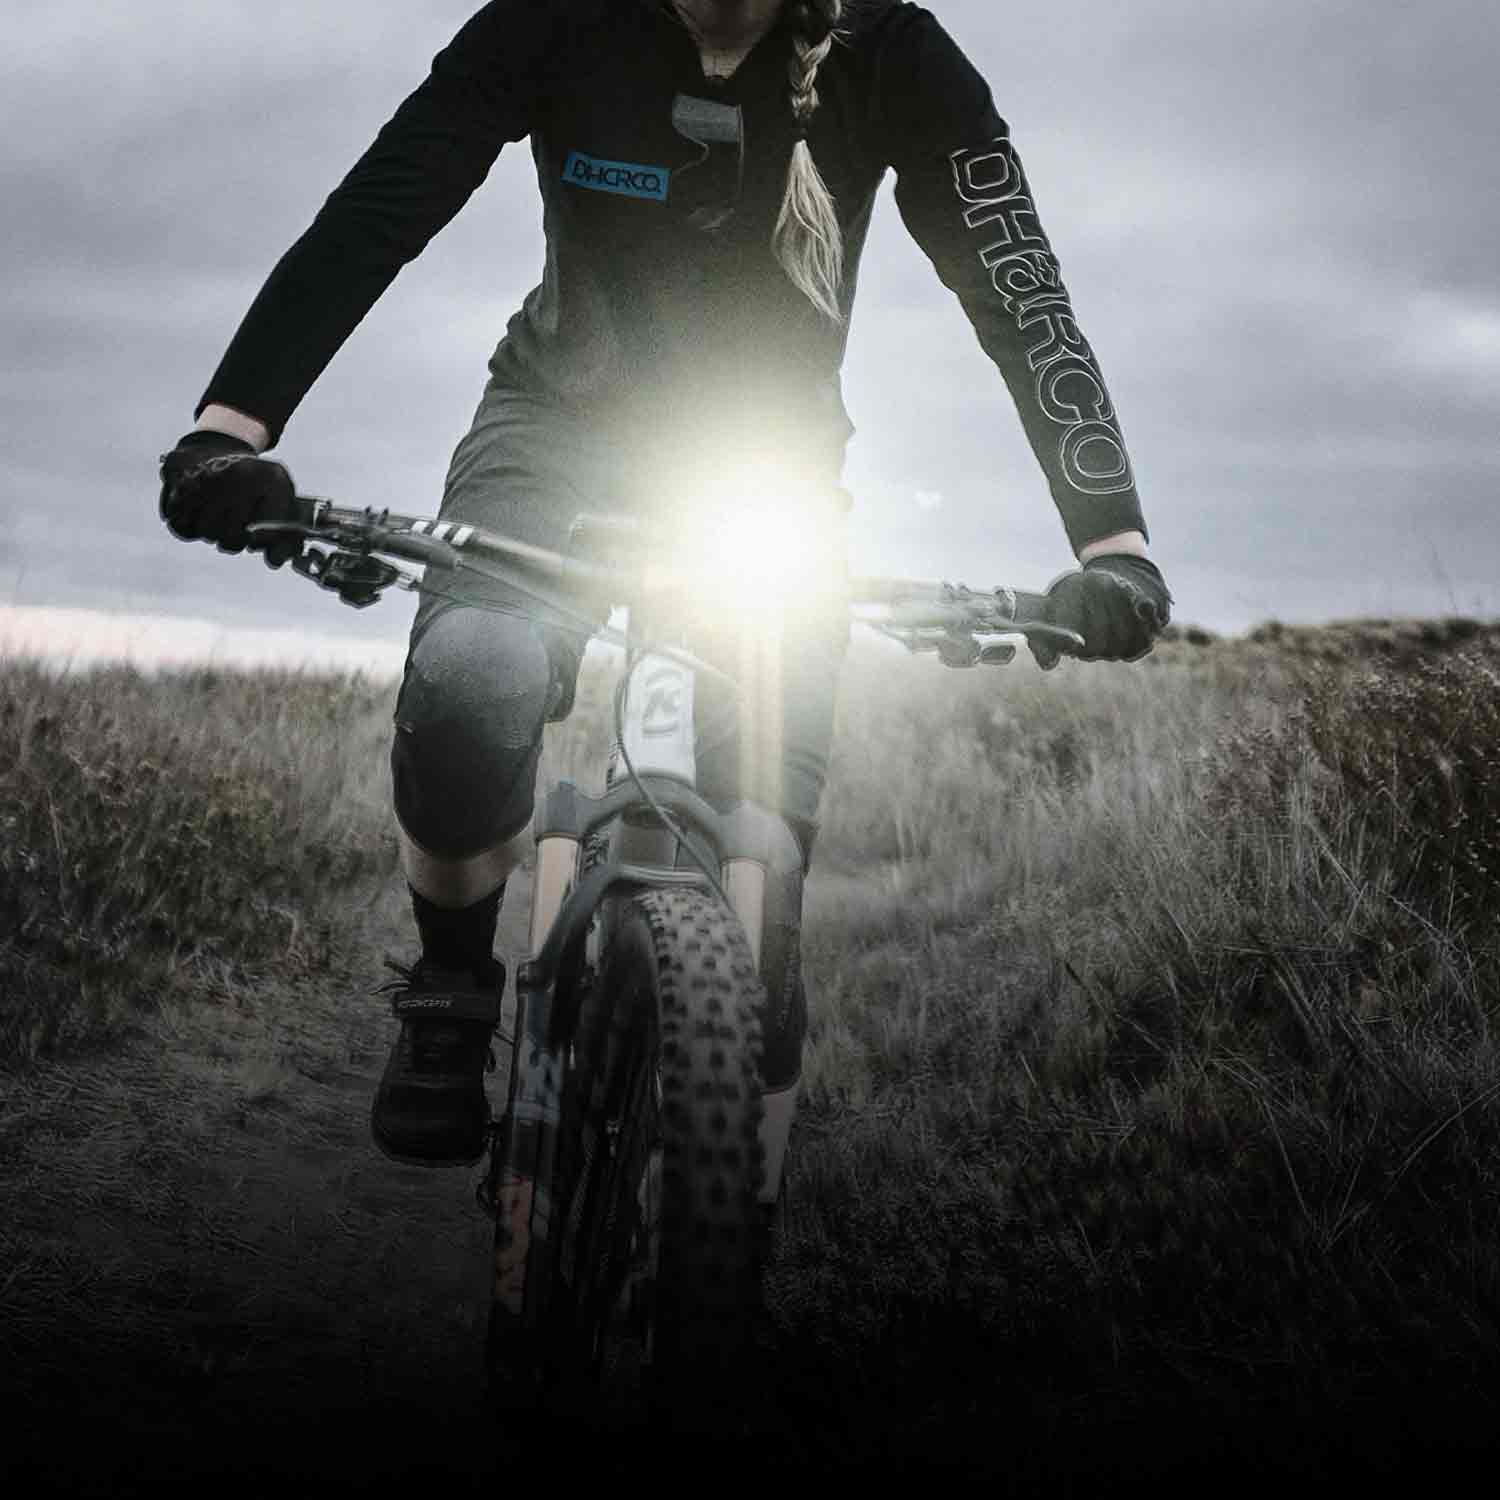 A very bright front bicycle light on a bicycle that is being ridden on rough terrain.